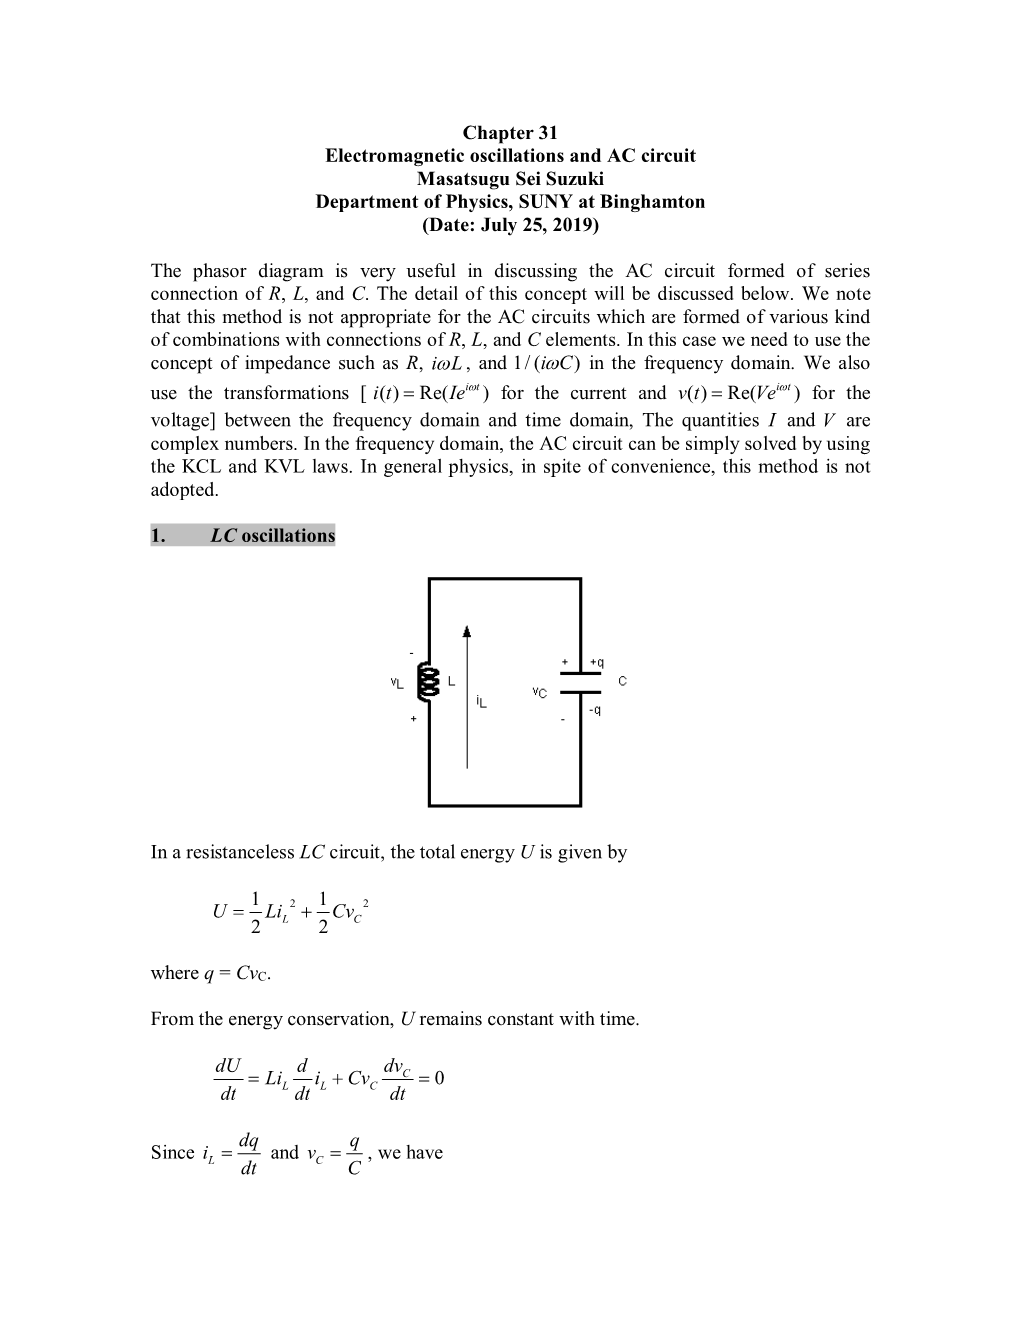 Chapter 31 Electromagnetic Oscillations and AC Circuit Masatsugu Sei Suzuki Department of Physics, SUNY at Binghamton (Date: July 25, 2019)